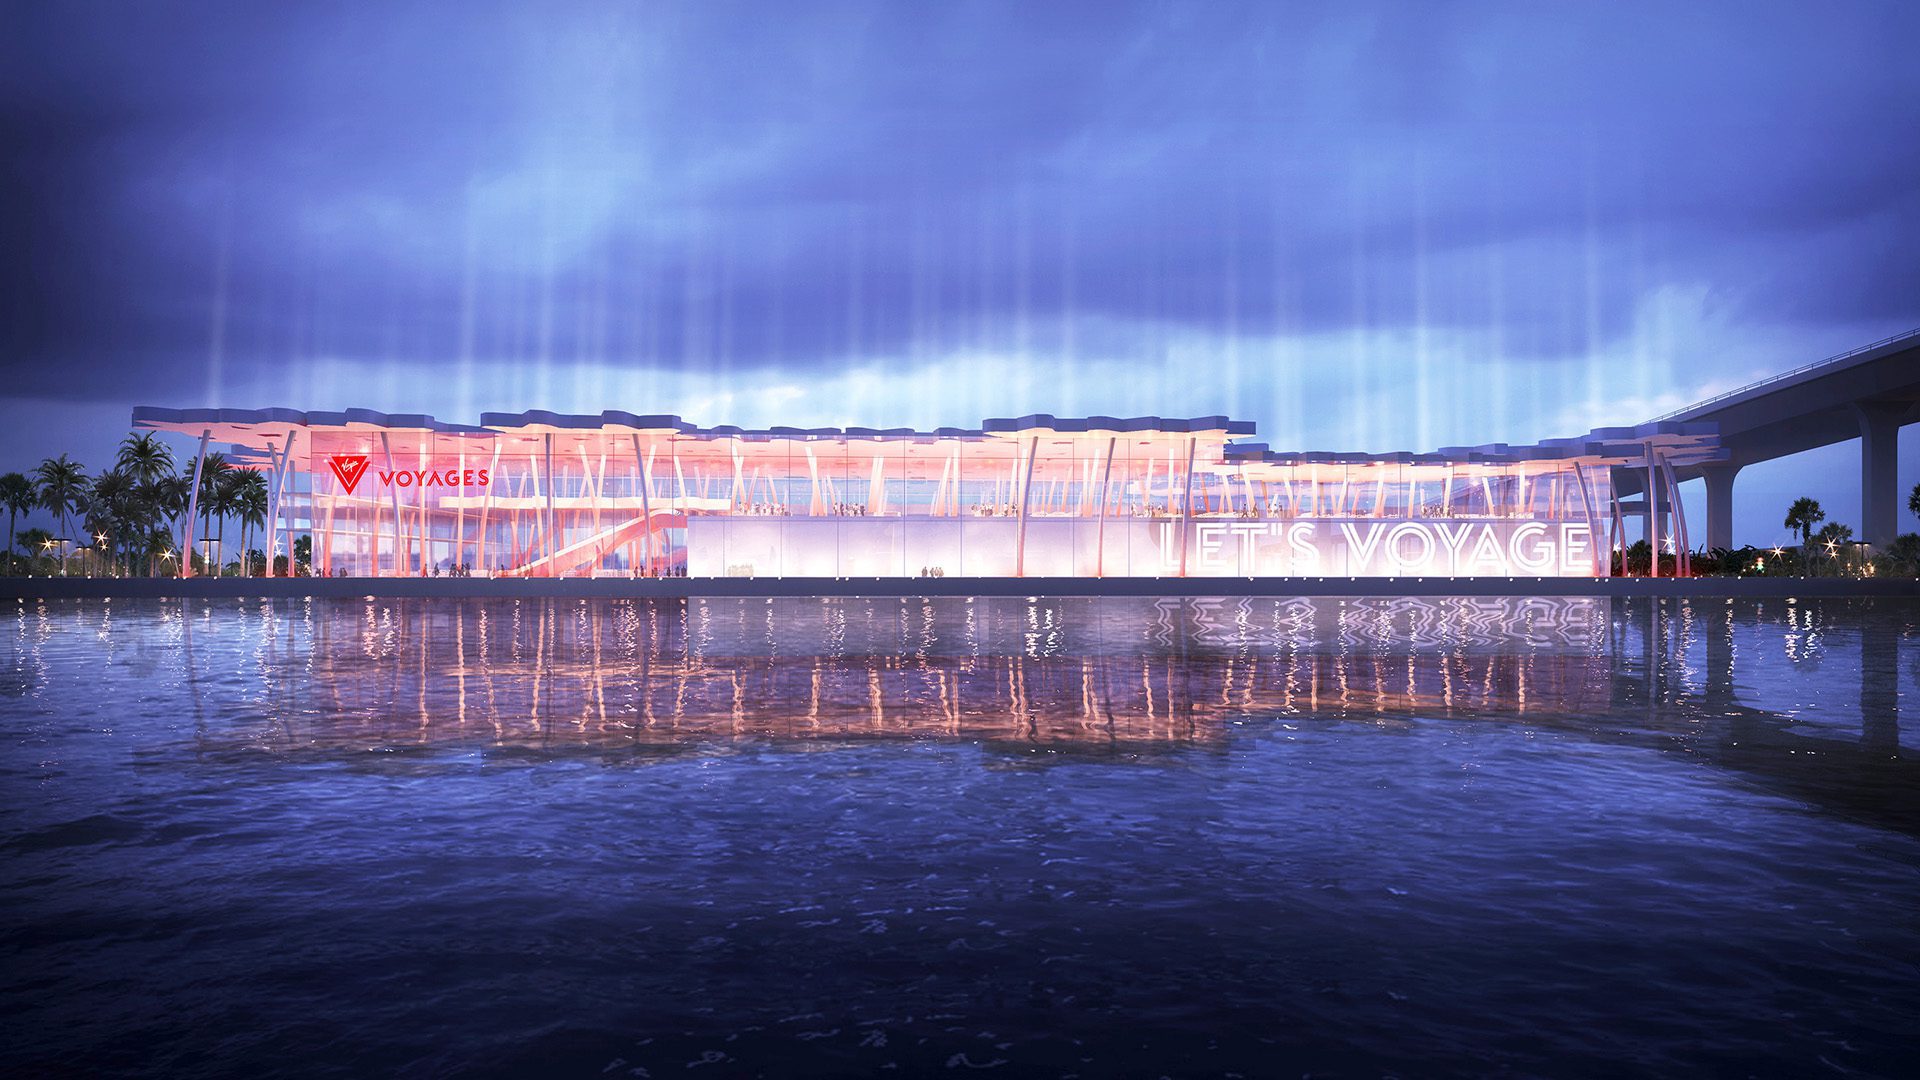 A rendering of a building in the water from past projects.